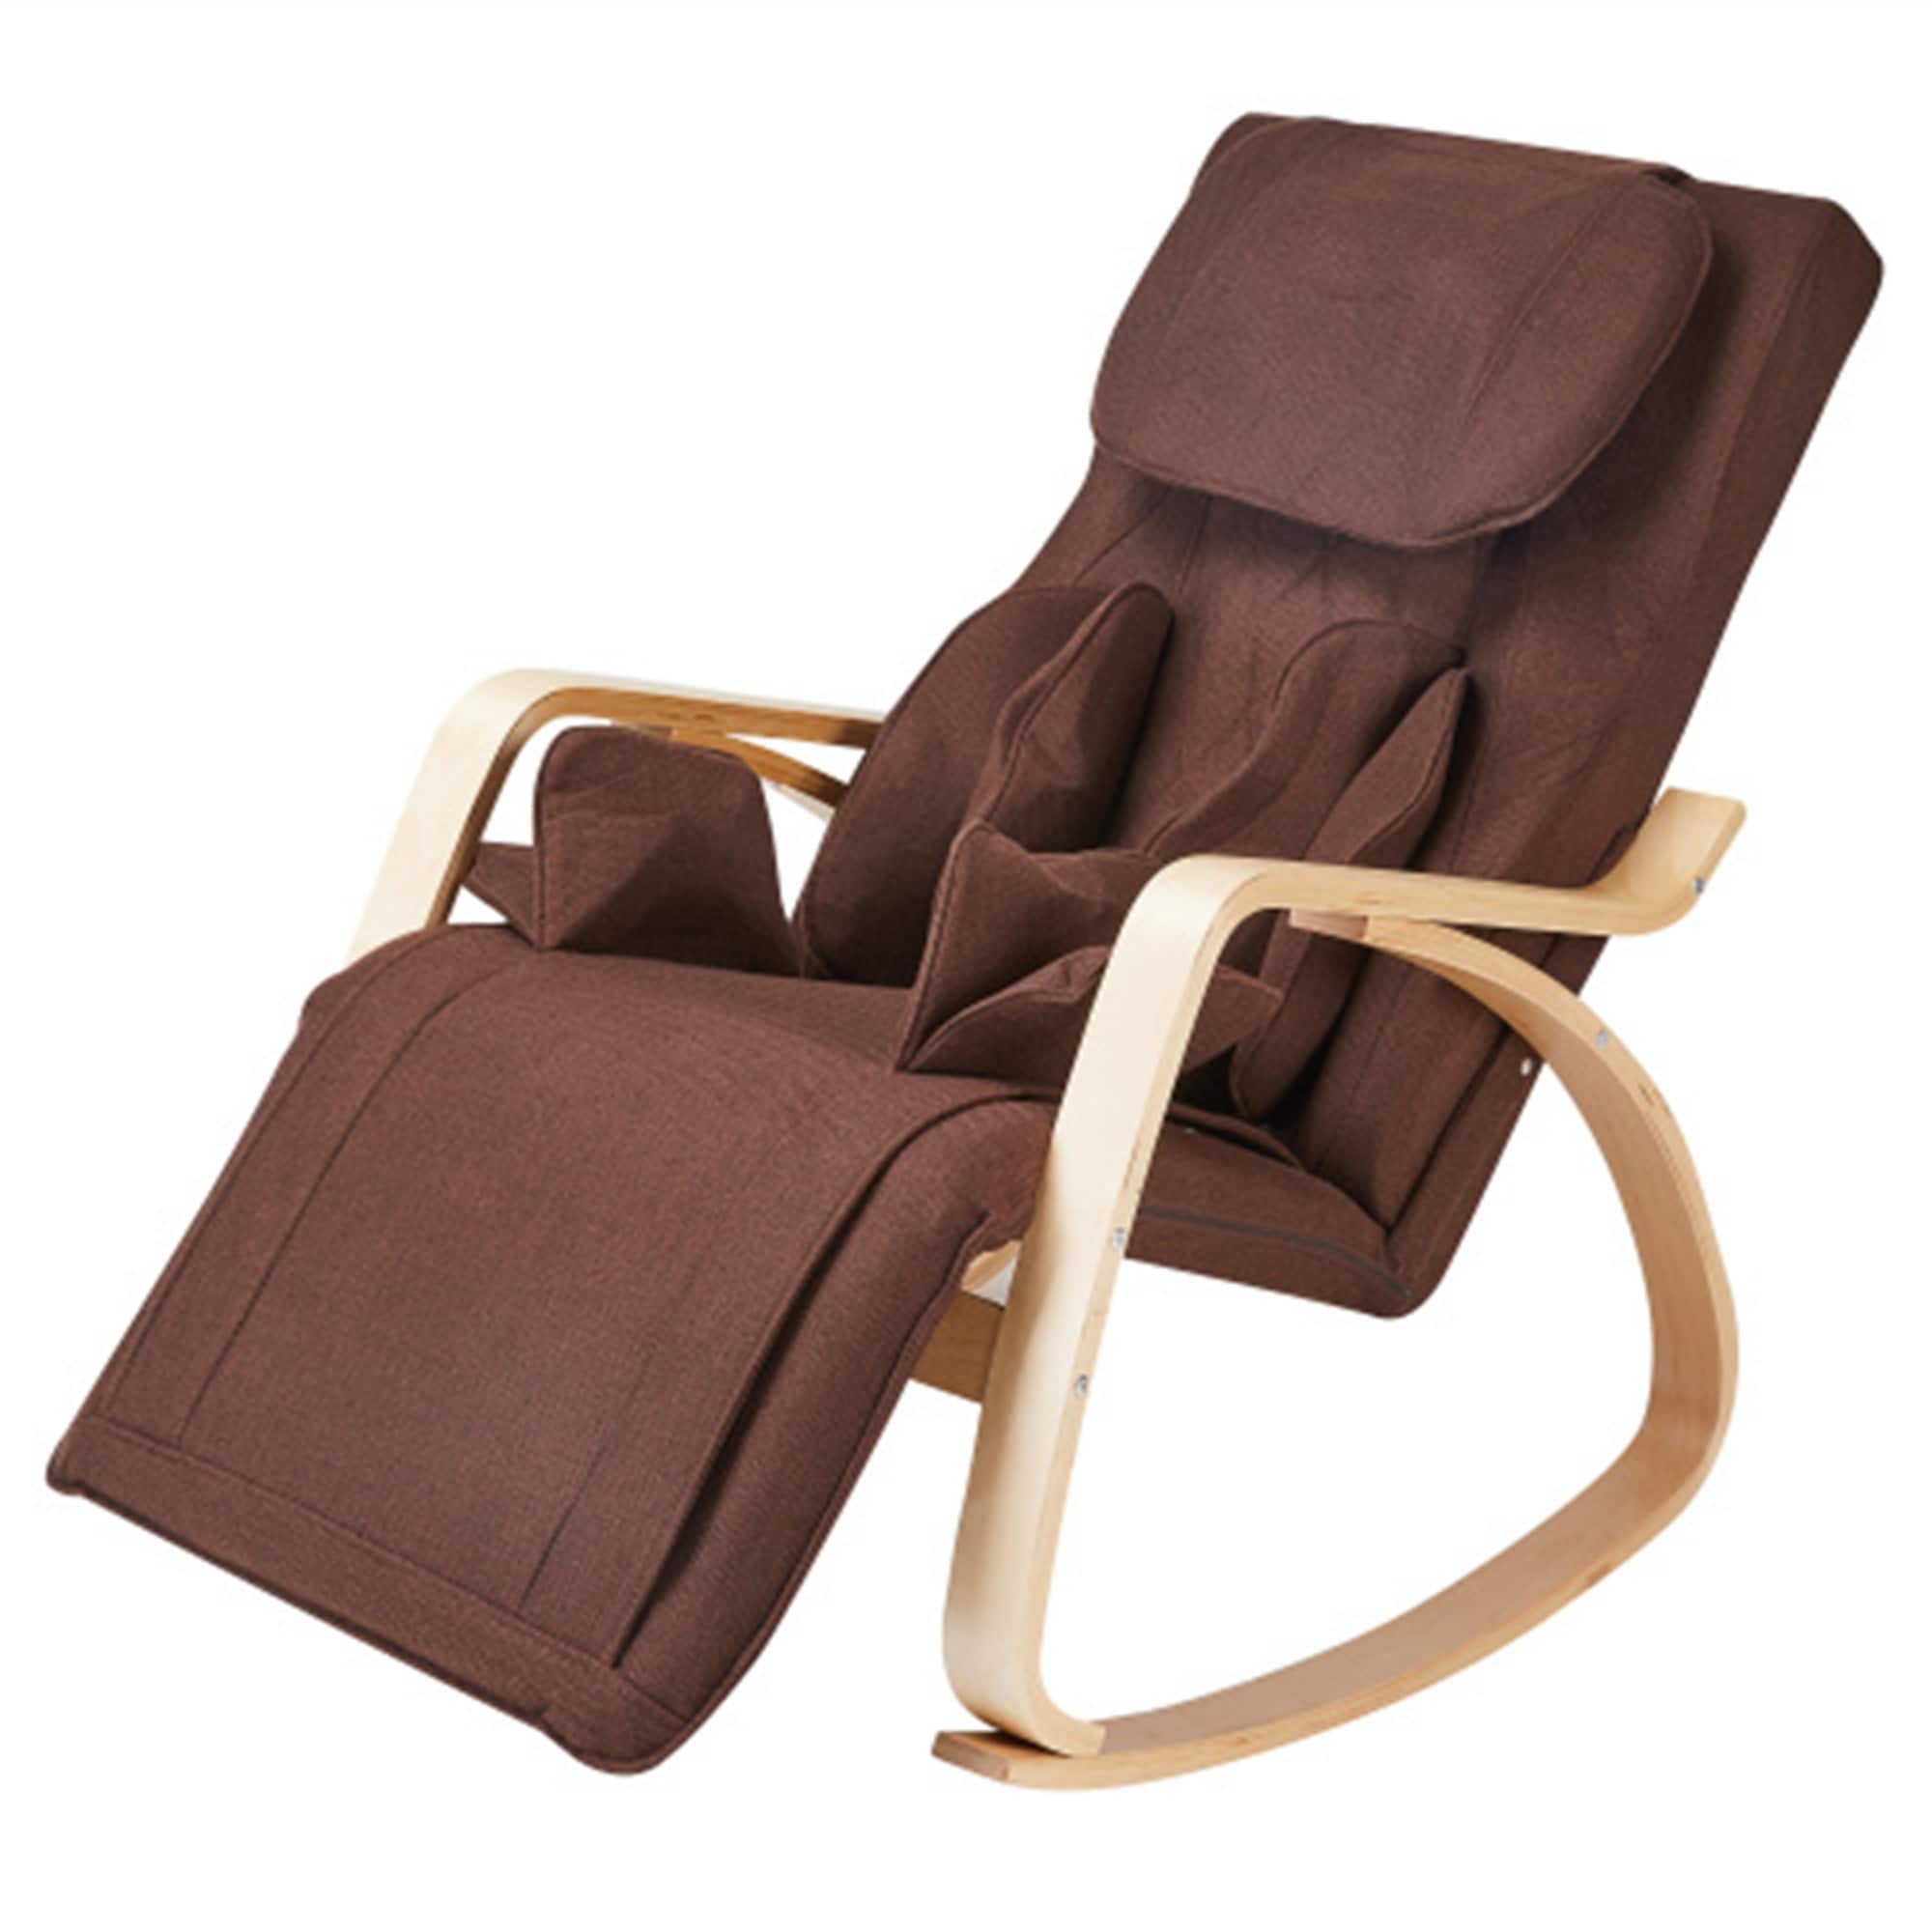 Natural Finish Massage Chairs - Bed Bath & Beyond